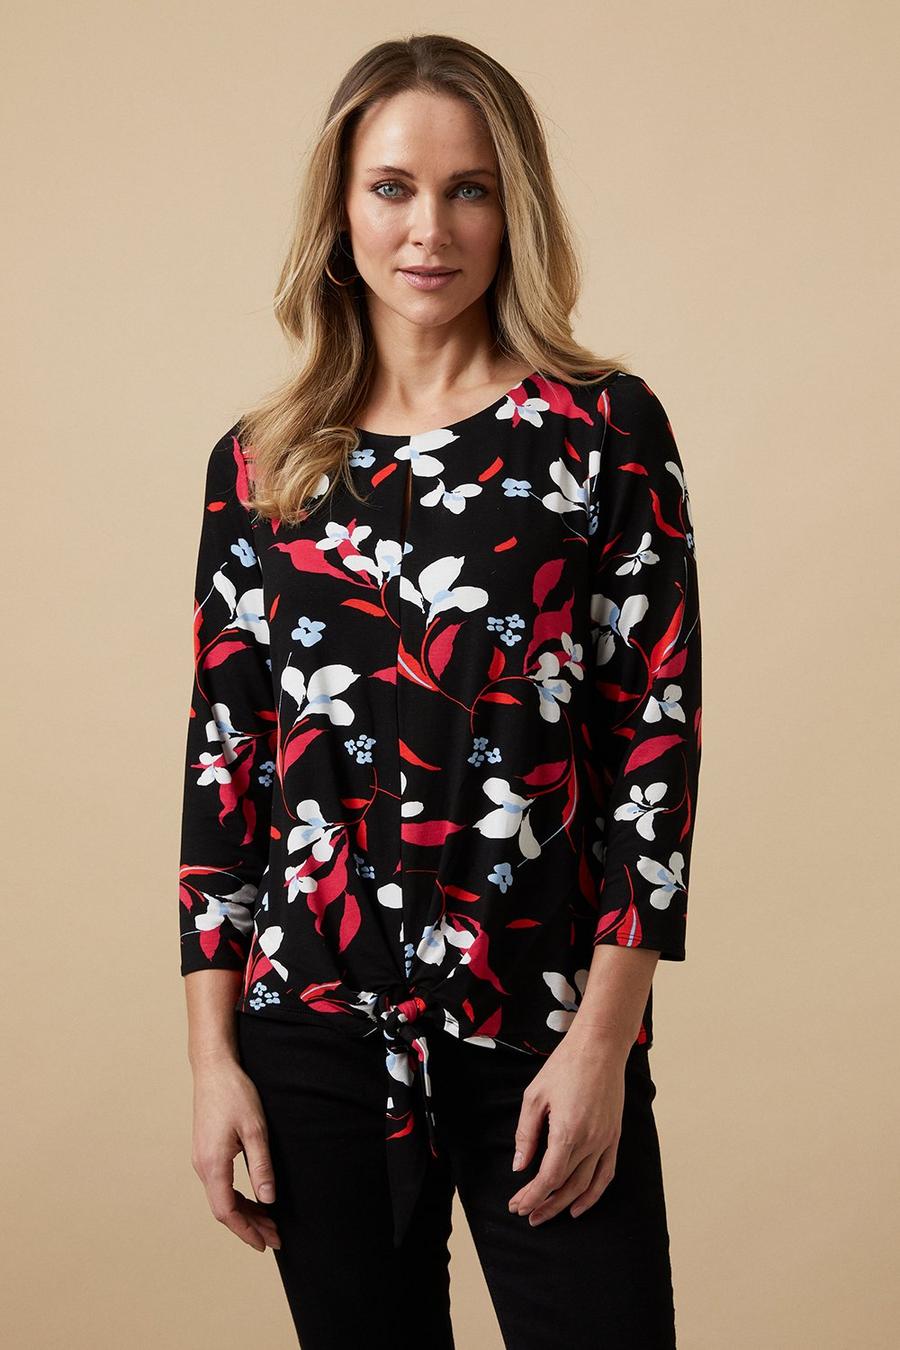 Black Floral Key Hole Tie Front Jersey Top